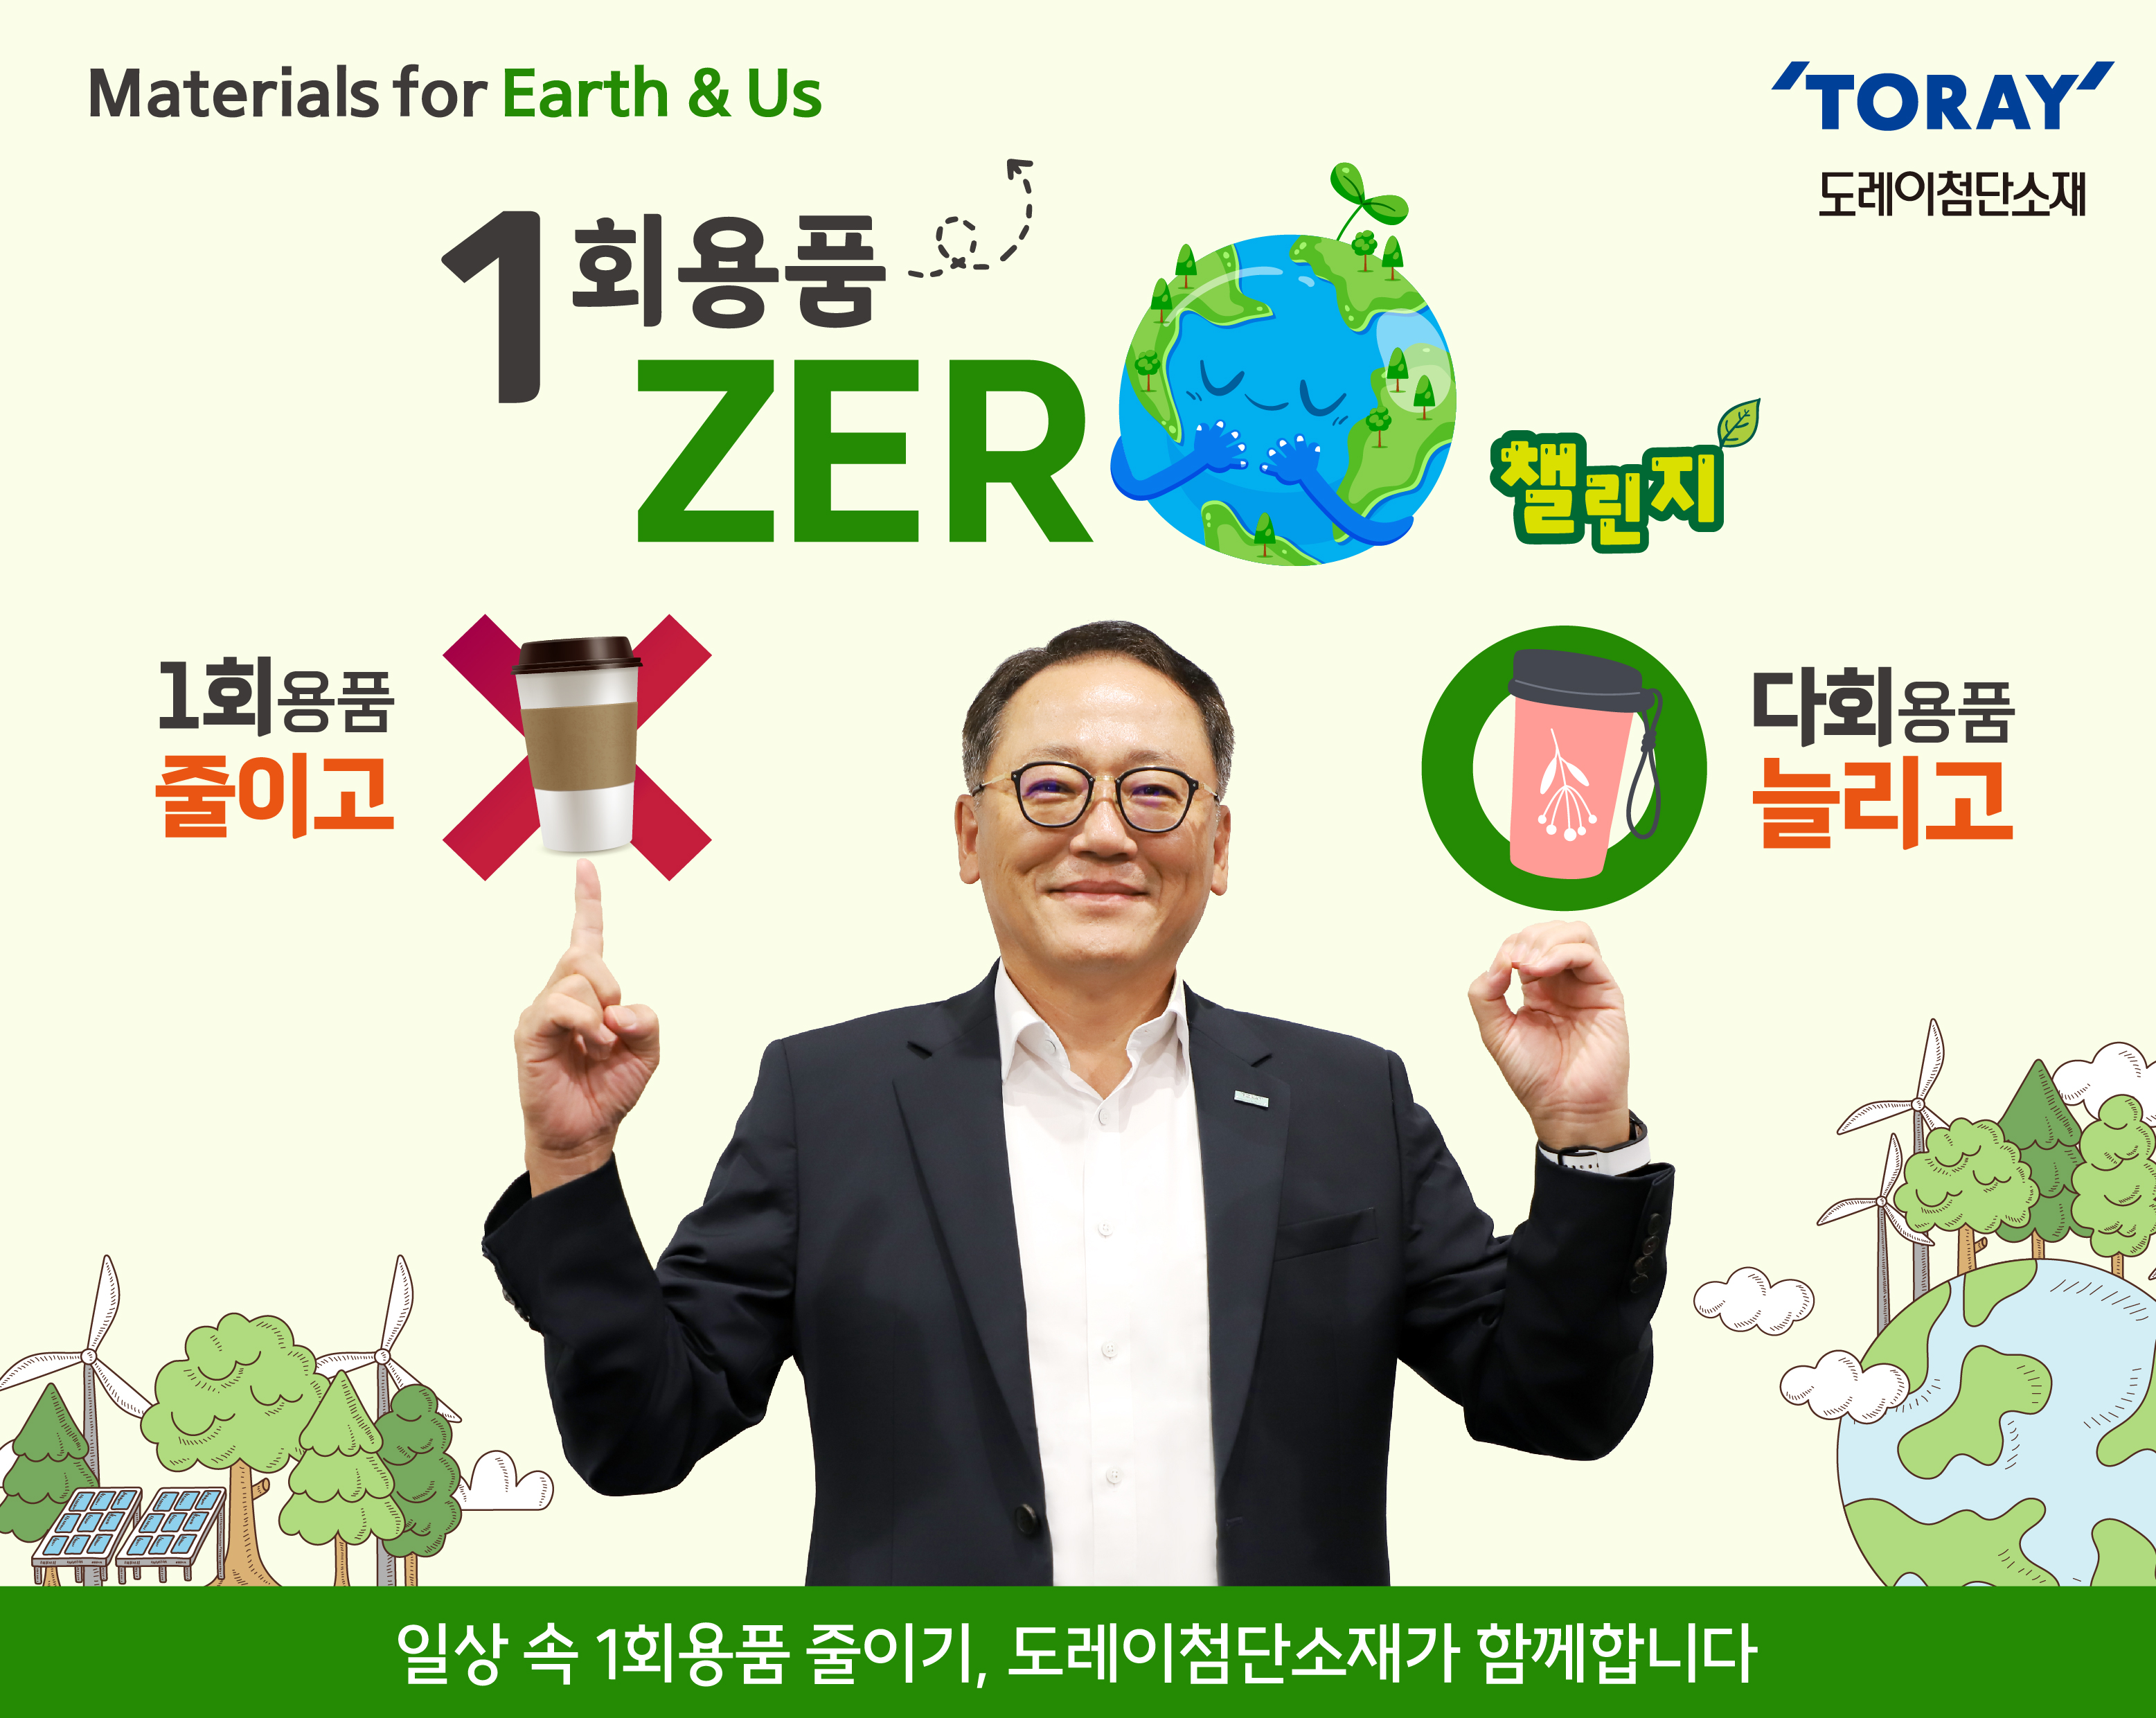 President Jeon Hae-sang particiated at ZERO Challenge Campaign for eco-friendly and ESG management